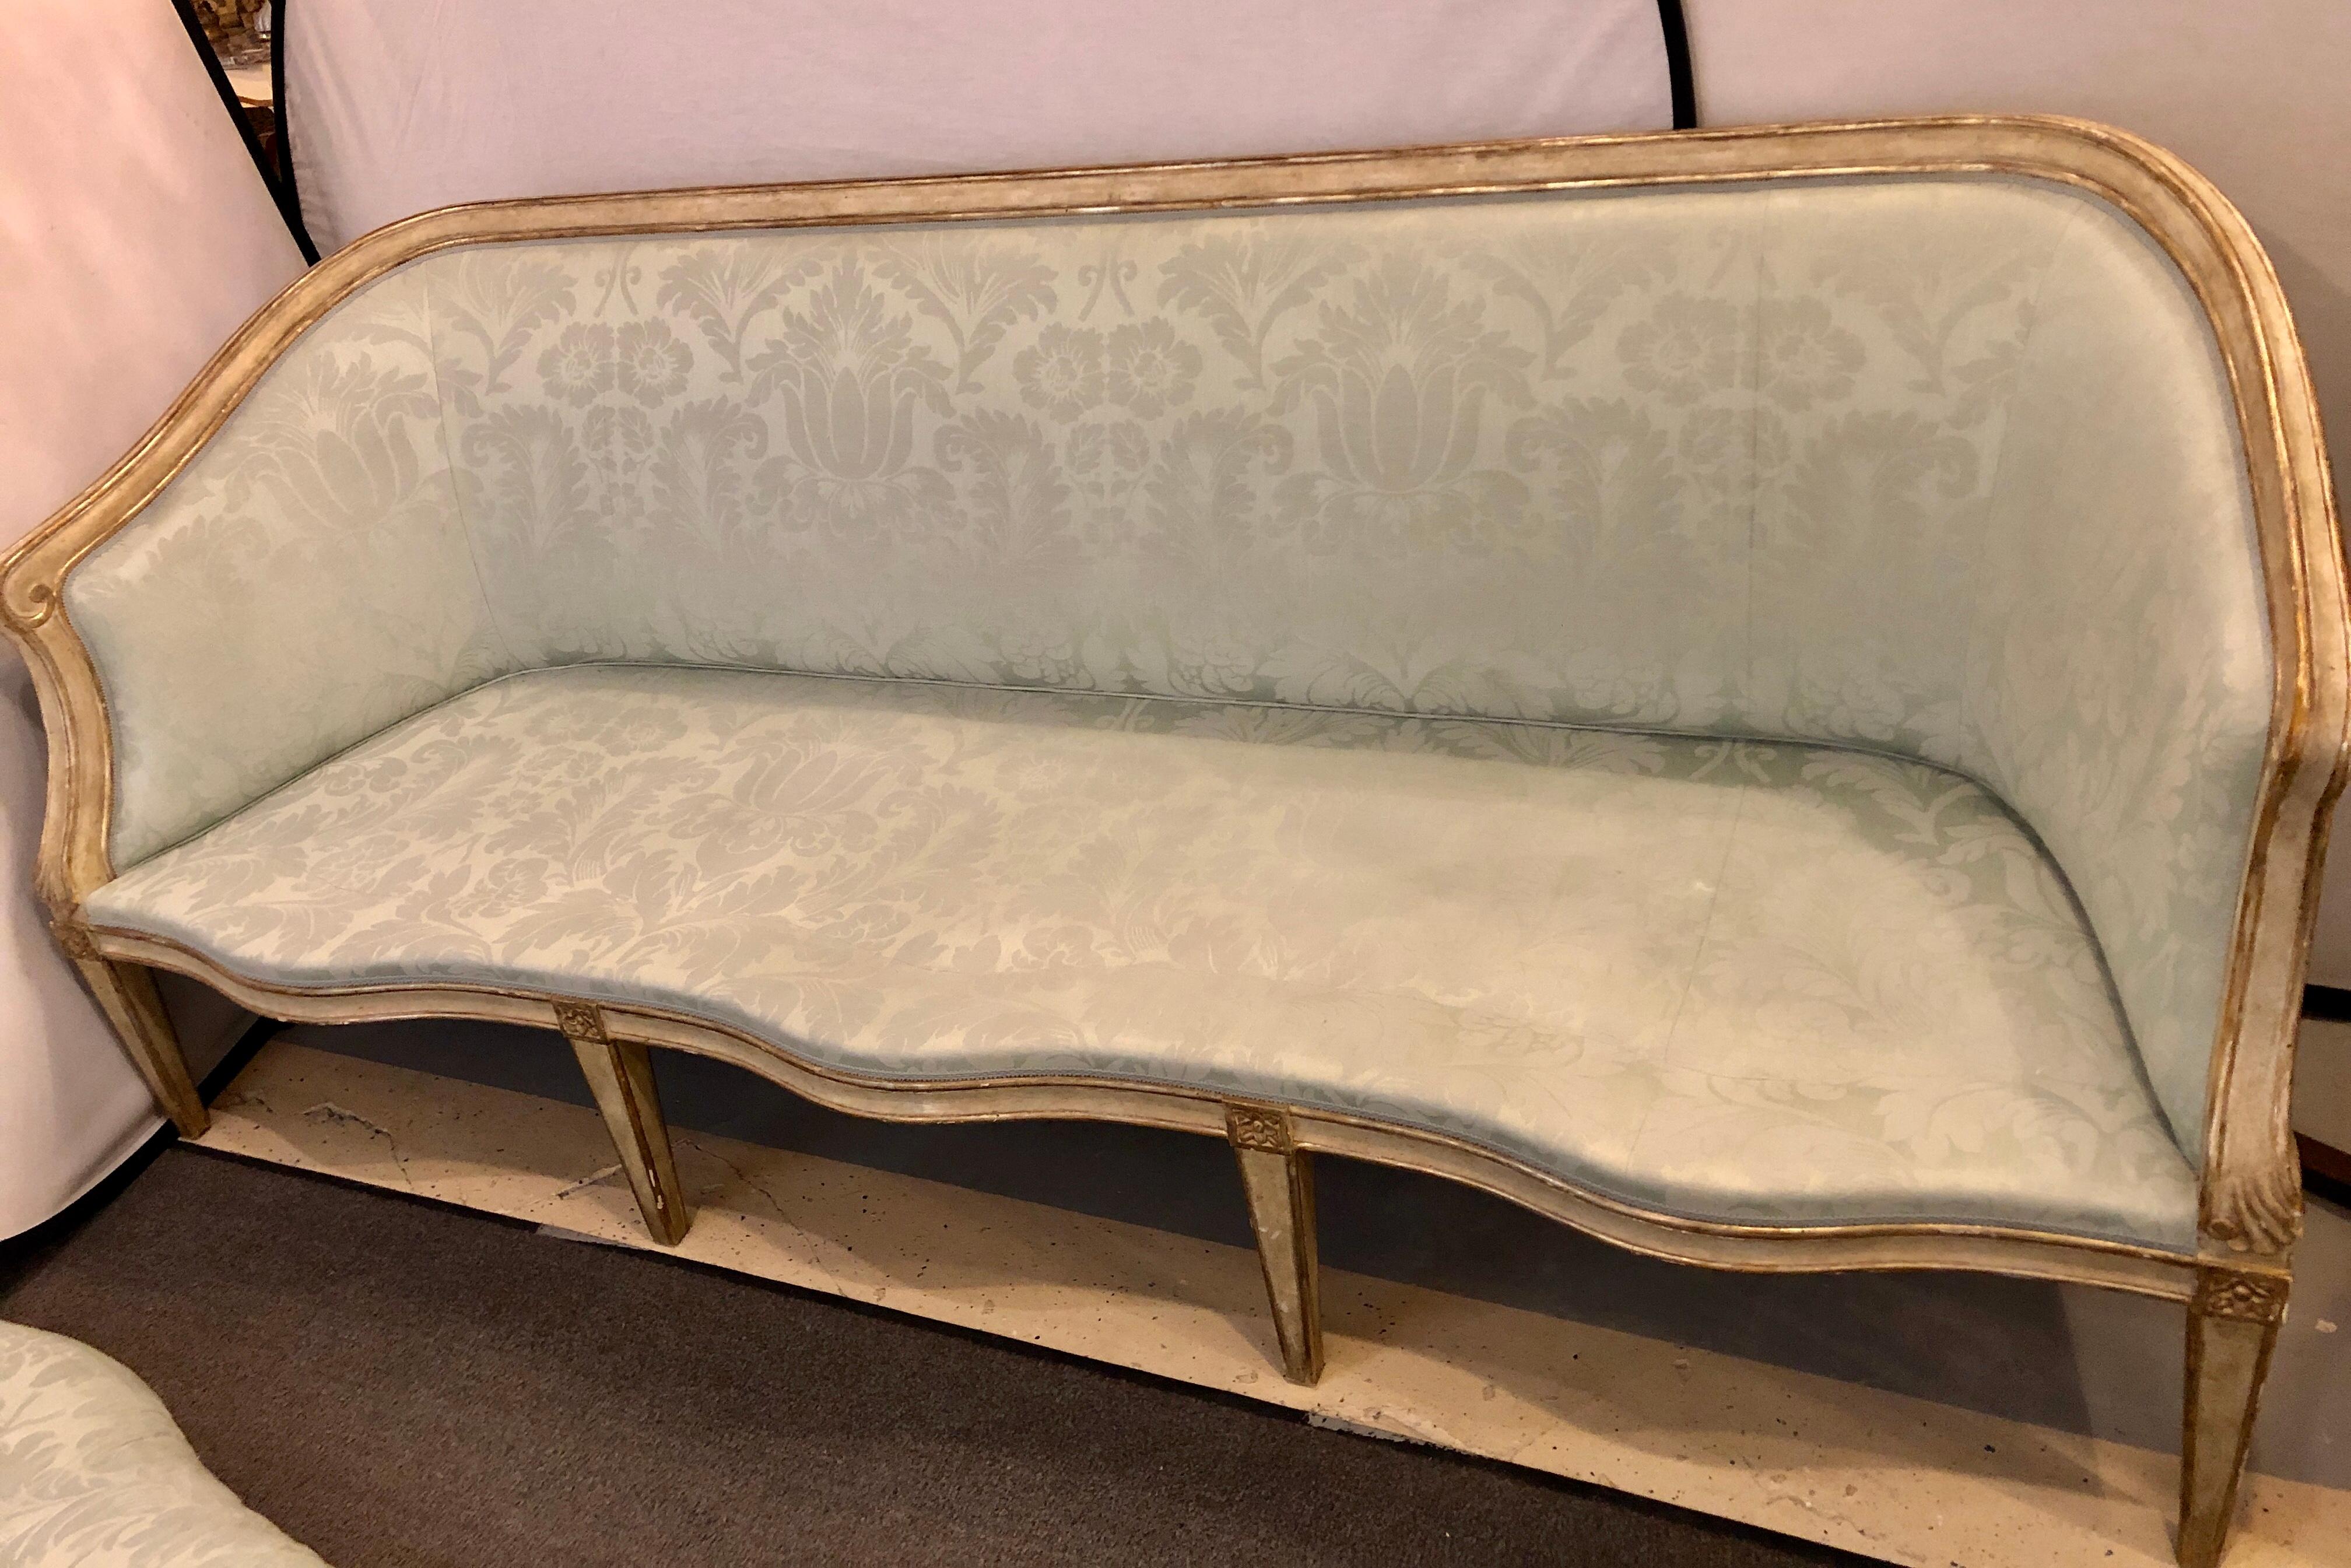 20th Century Late 19th Century Swedish Gilt and Parcel Paint Decorated Sofa